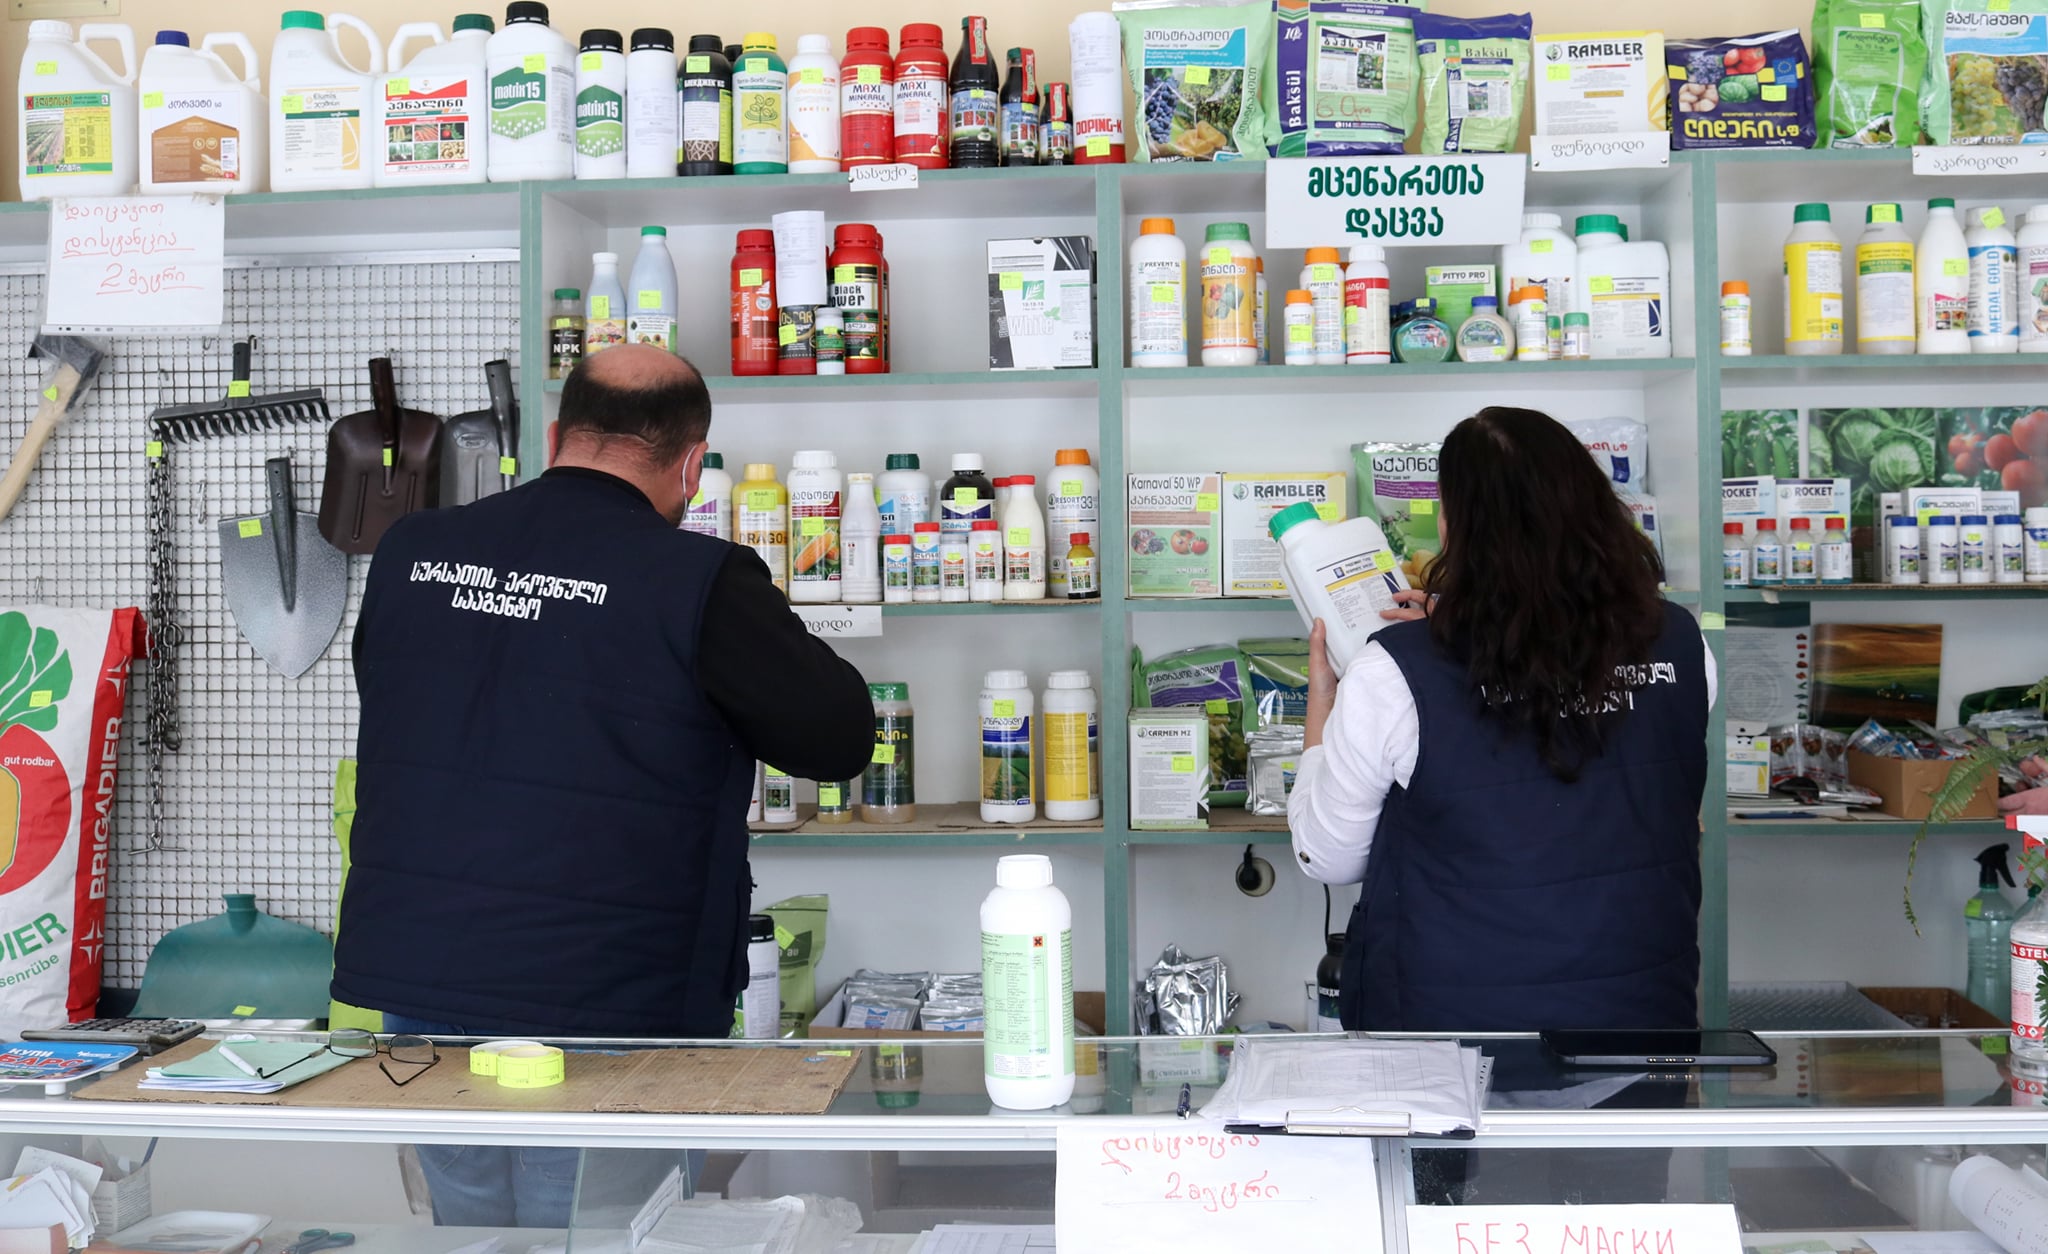 24 specialty stores of pesticides and agrochemicals were fined for violations